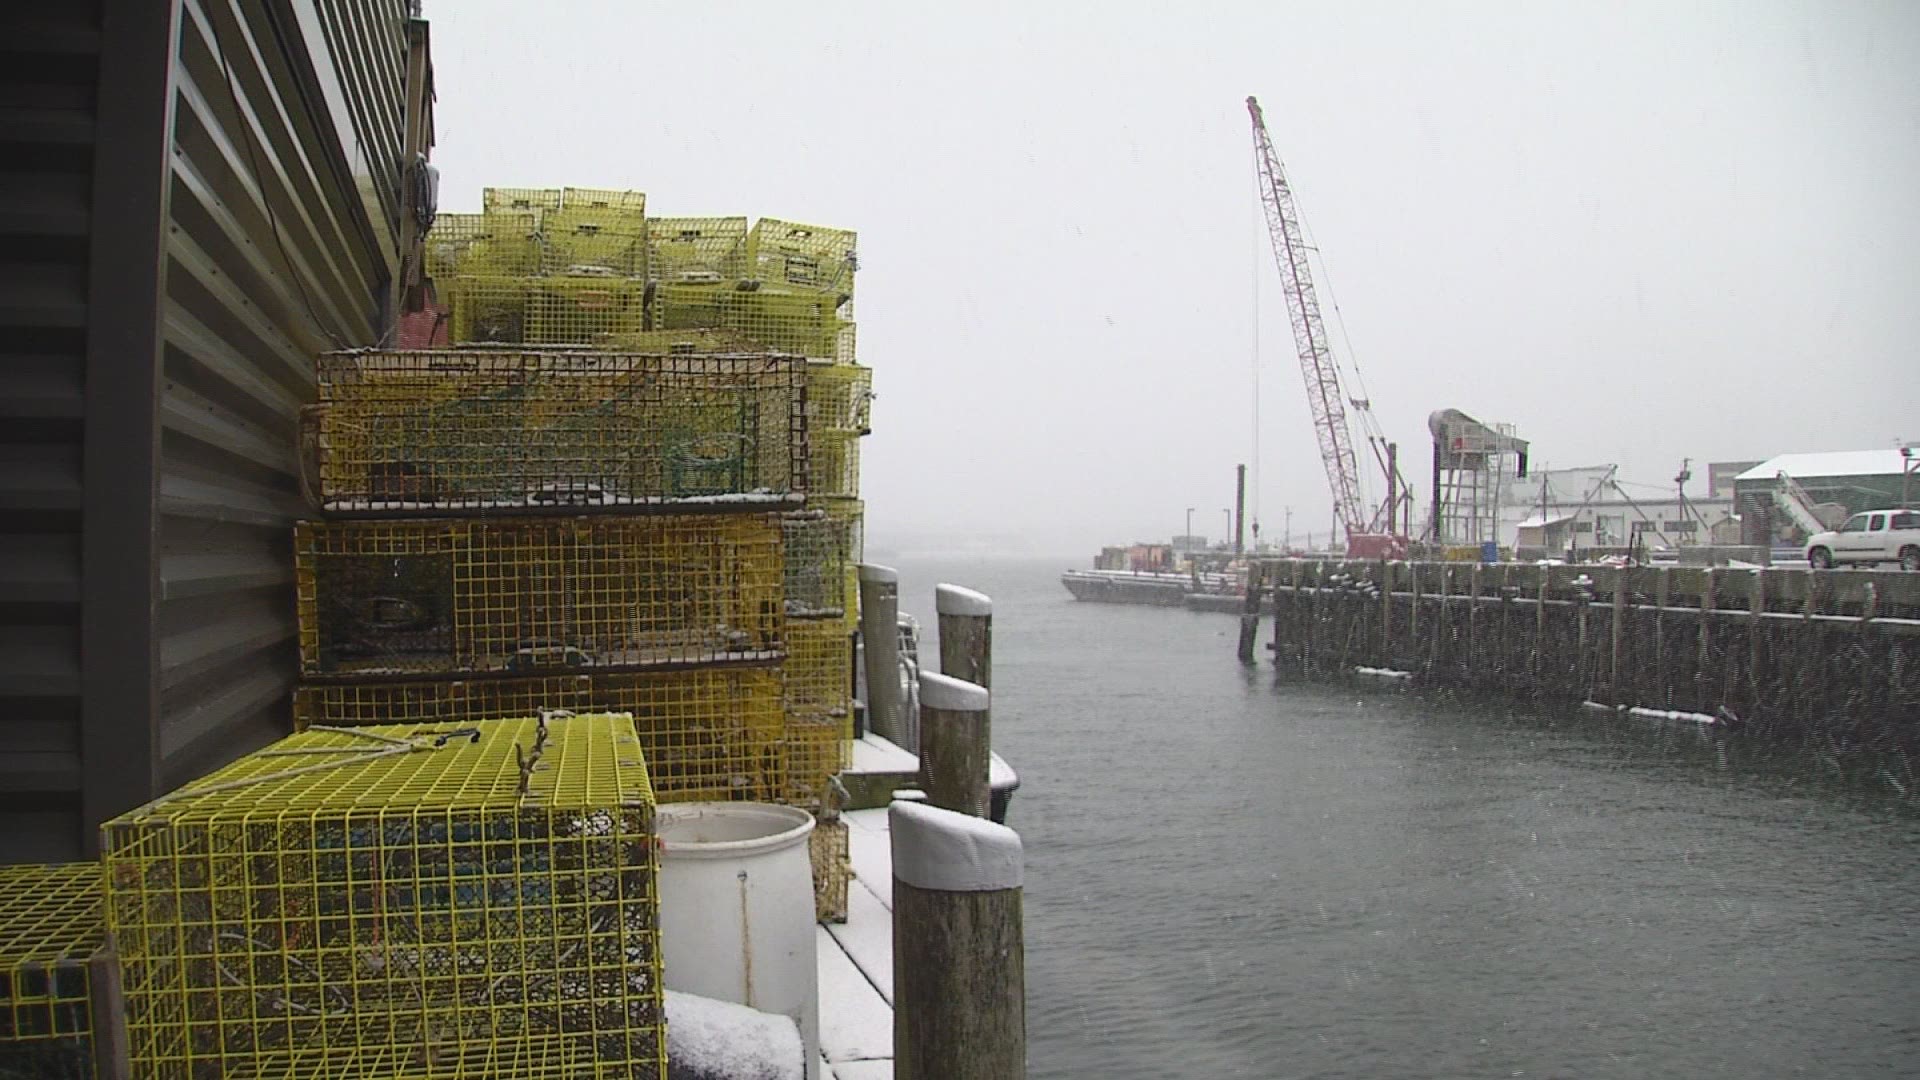 A shortage in the popular bait herring could cause problems for lobstermen.